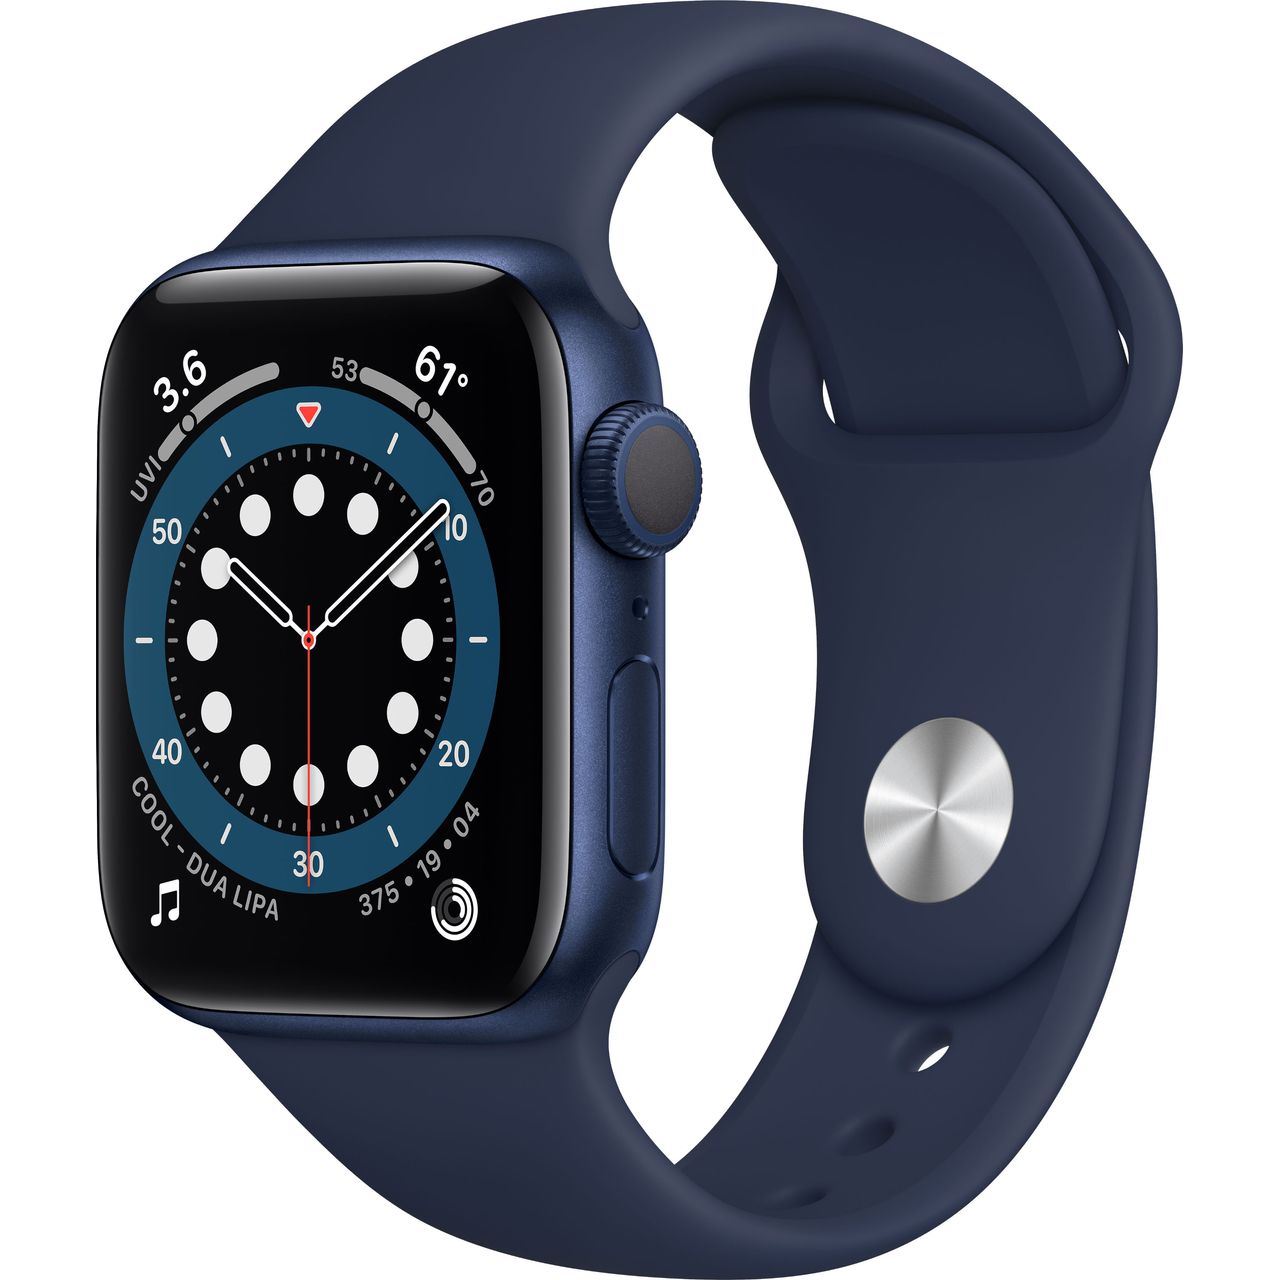 Apple Watch Series 6, 40mm, GPS [2020] Review